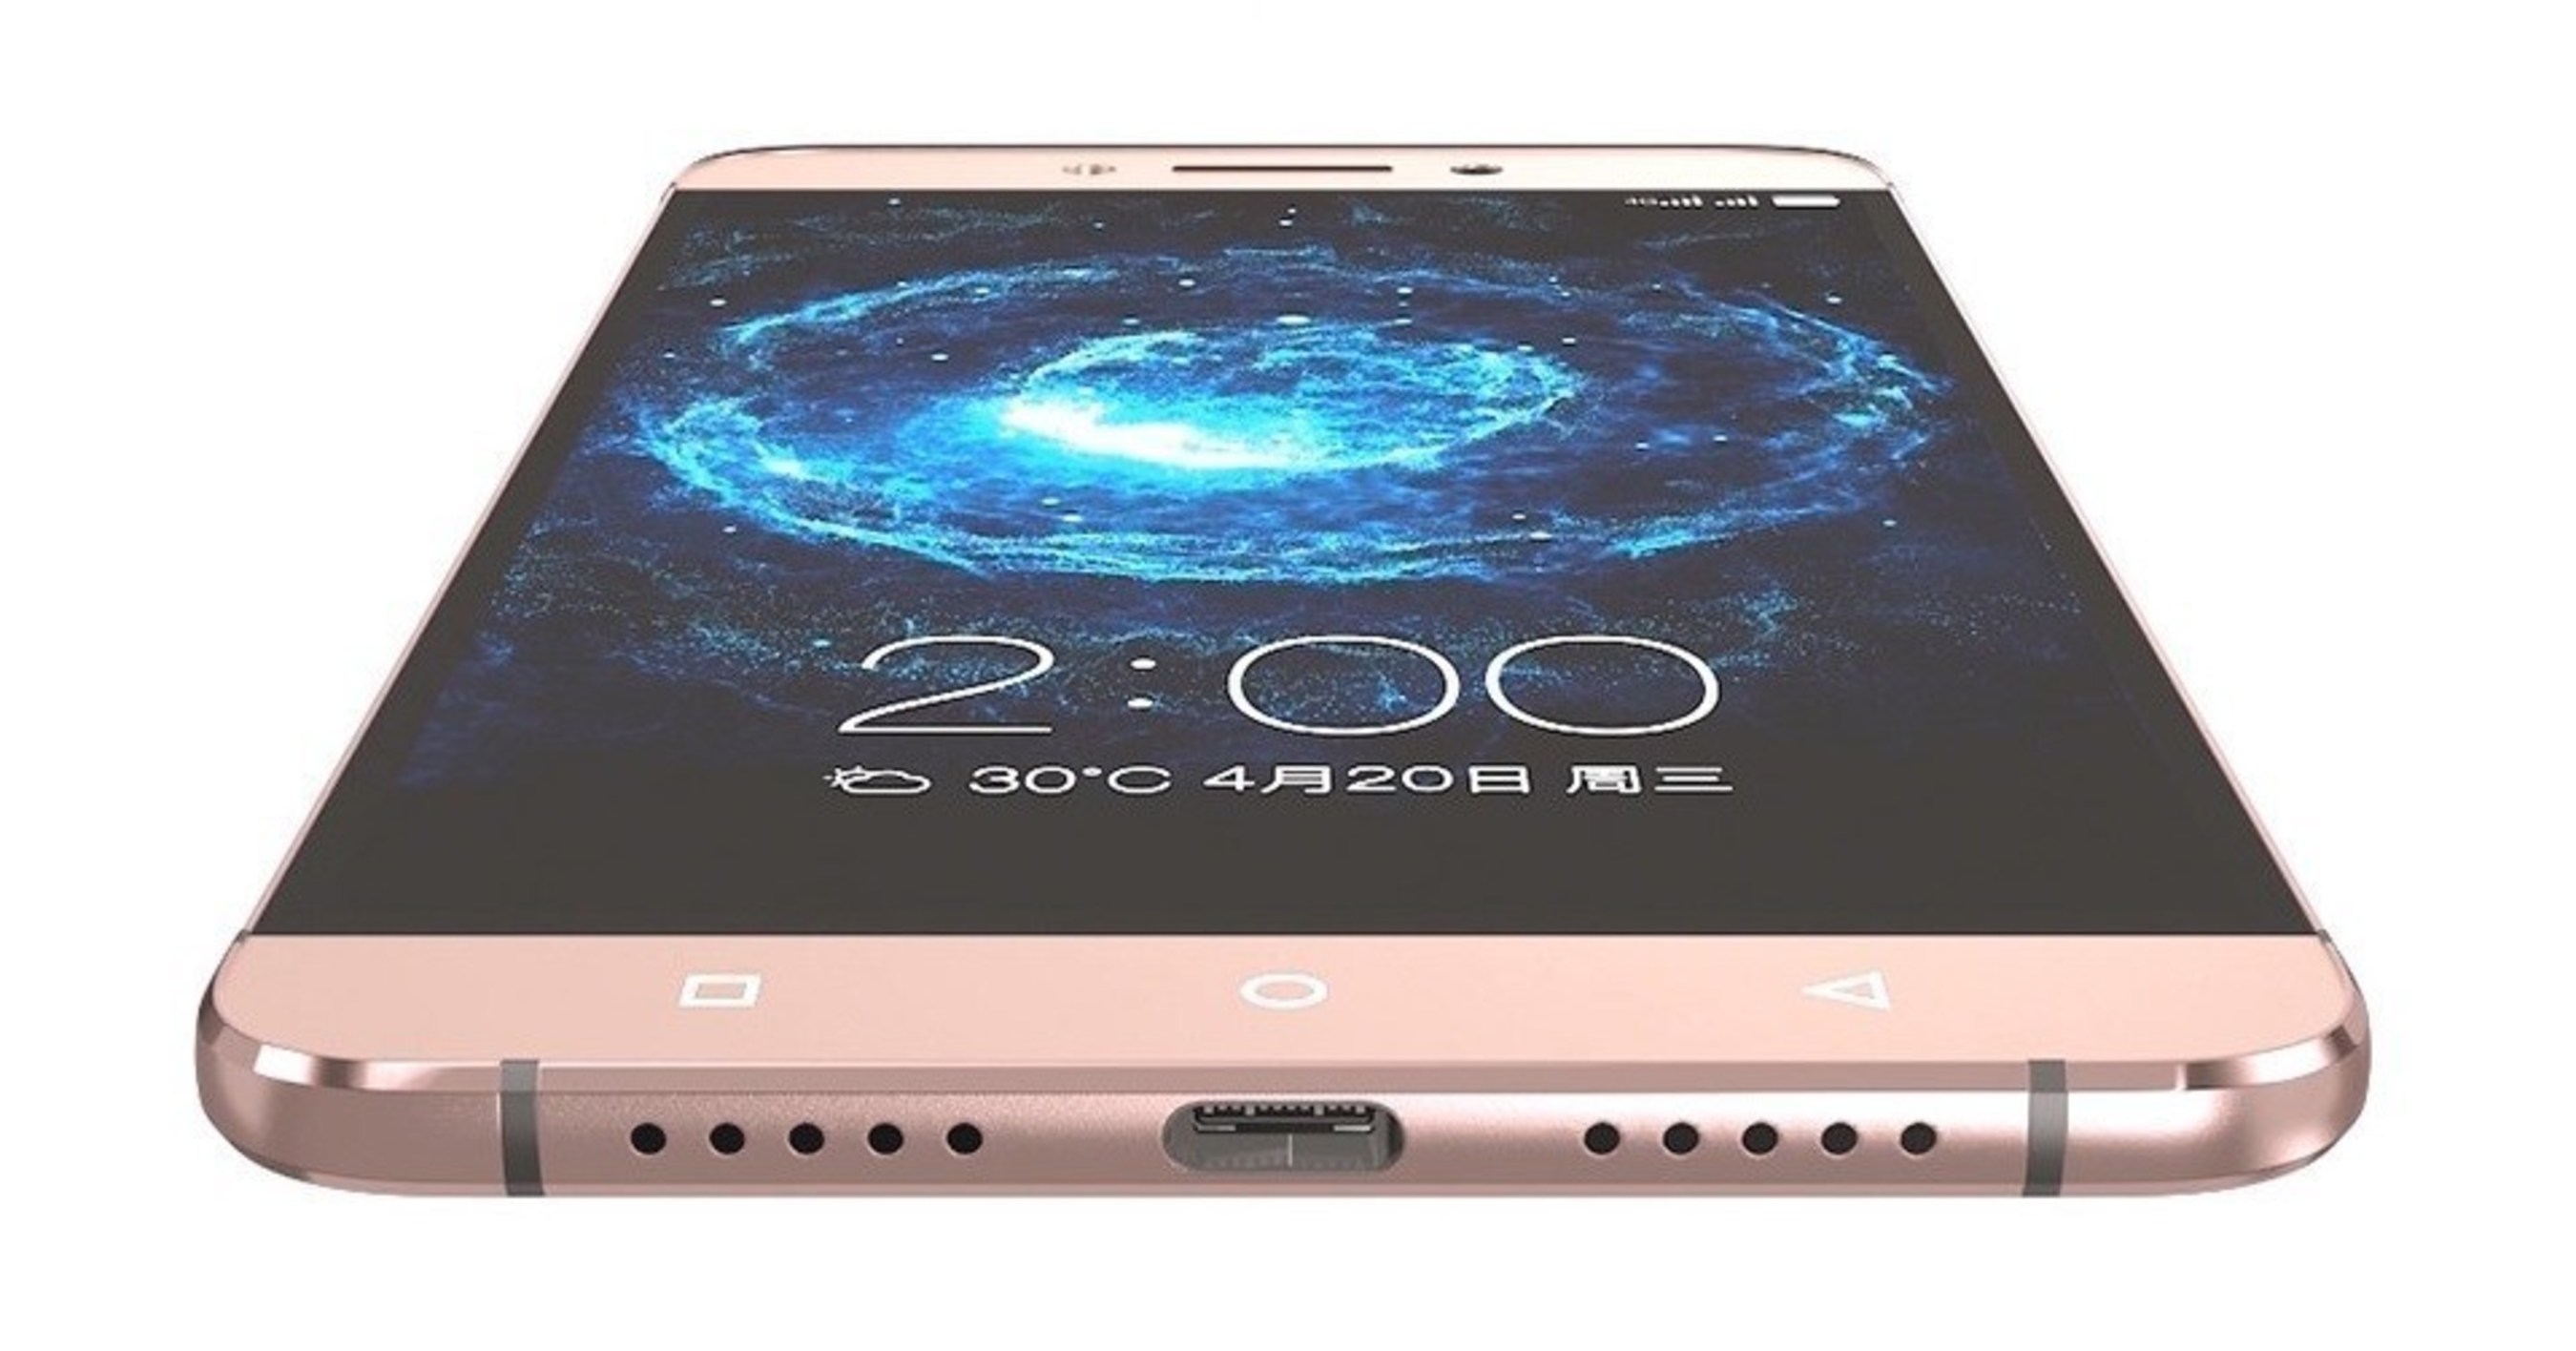 Pictured is LeEco's flagship Le Max2 smartphone, which is the world's first phone with one USB-C port for data transmission, power charging and audio.  The phone uses the EZ-PD CCG2 USB-C controller from Cypress Semiconductor Corp.